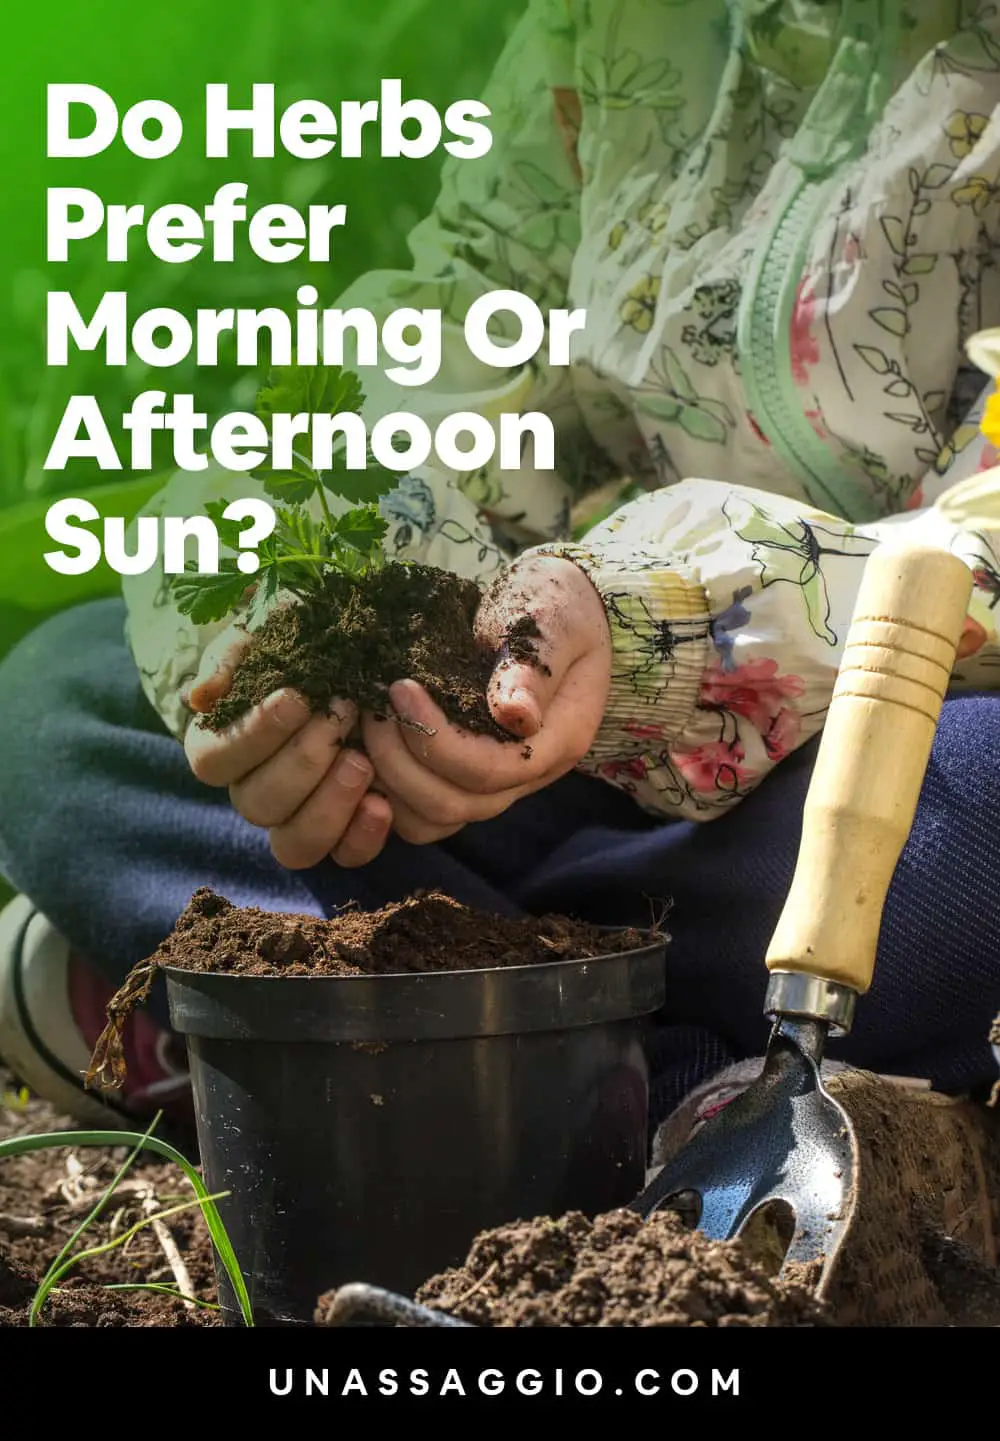 Do Herbs Prefer Morning Or Afternoon Sun?